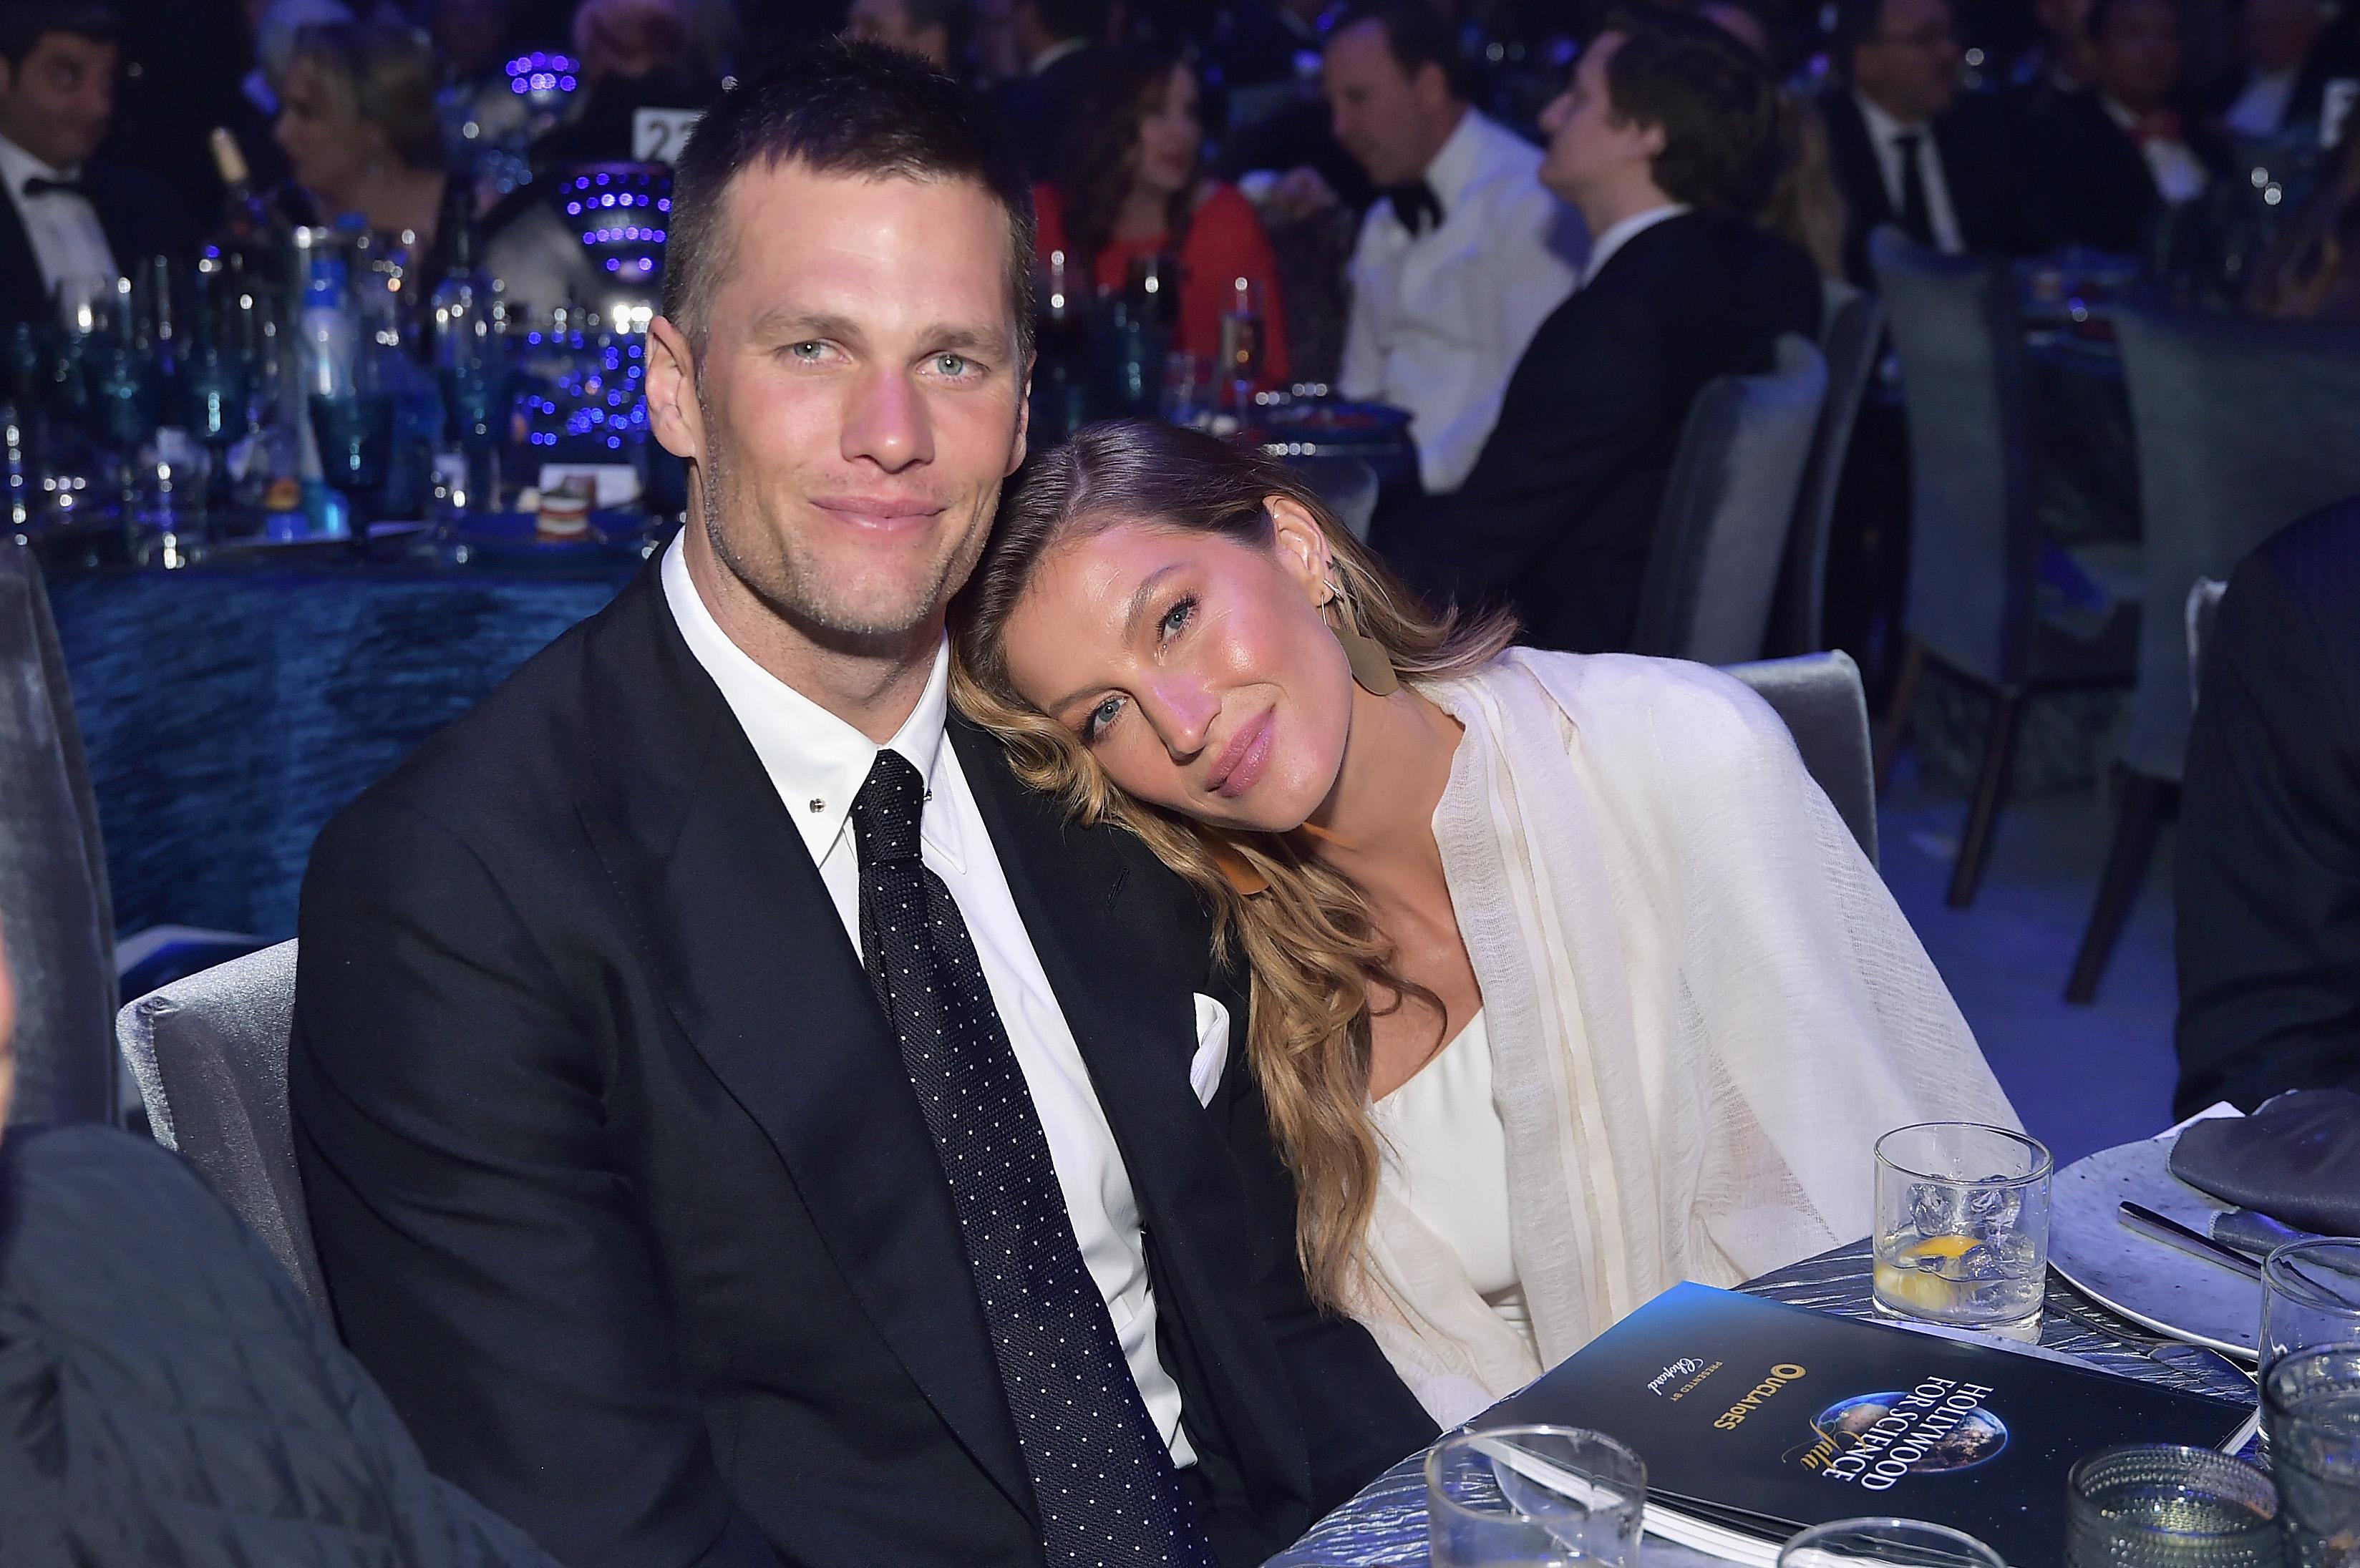 Tom Brady Reflects On Finding Out EX-GF Bridget Moynahan Was Pregnant When He Started Dating Gisele Bündchen